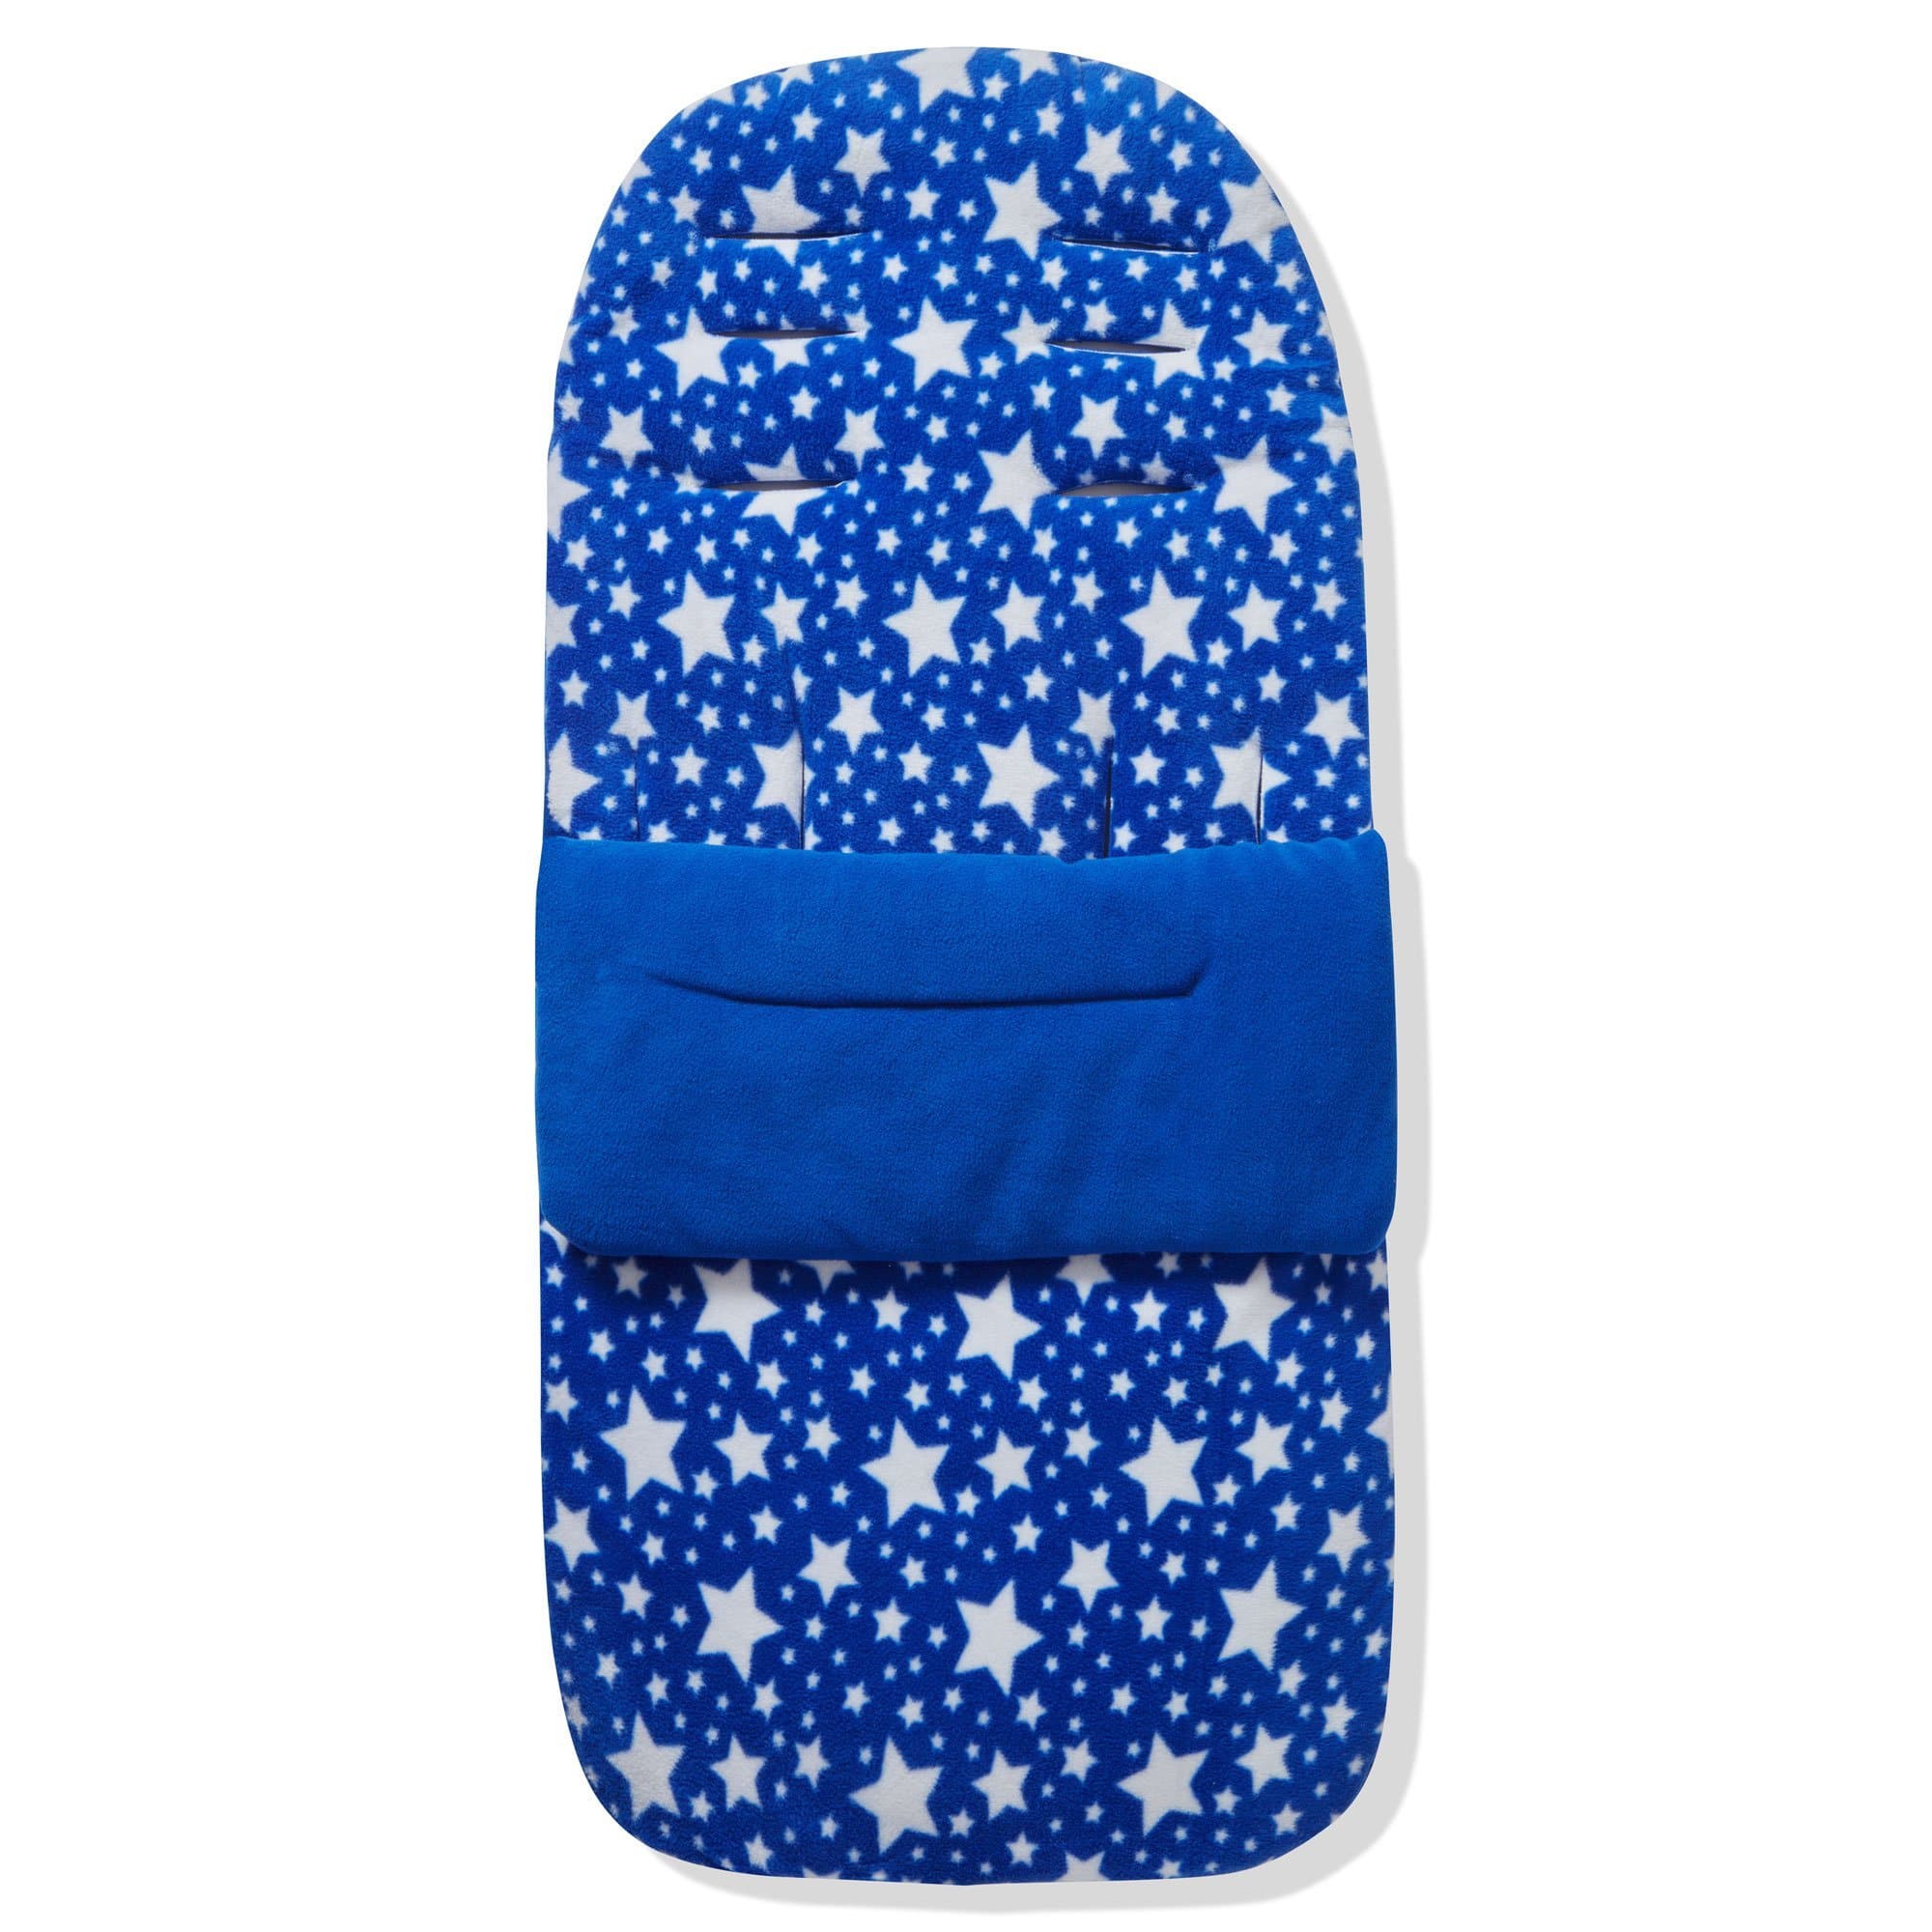 Fleece Footmuff / Cosy Toes Compatible with Hartan - Blue Star / Fits All Models | For Your Little One